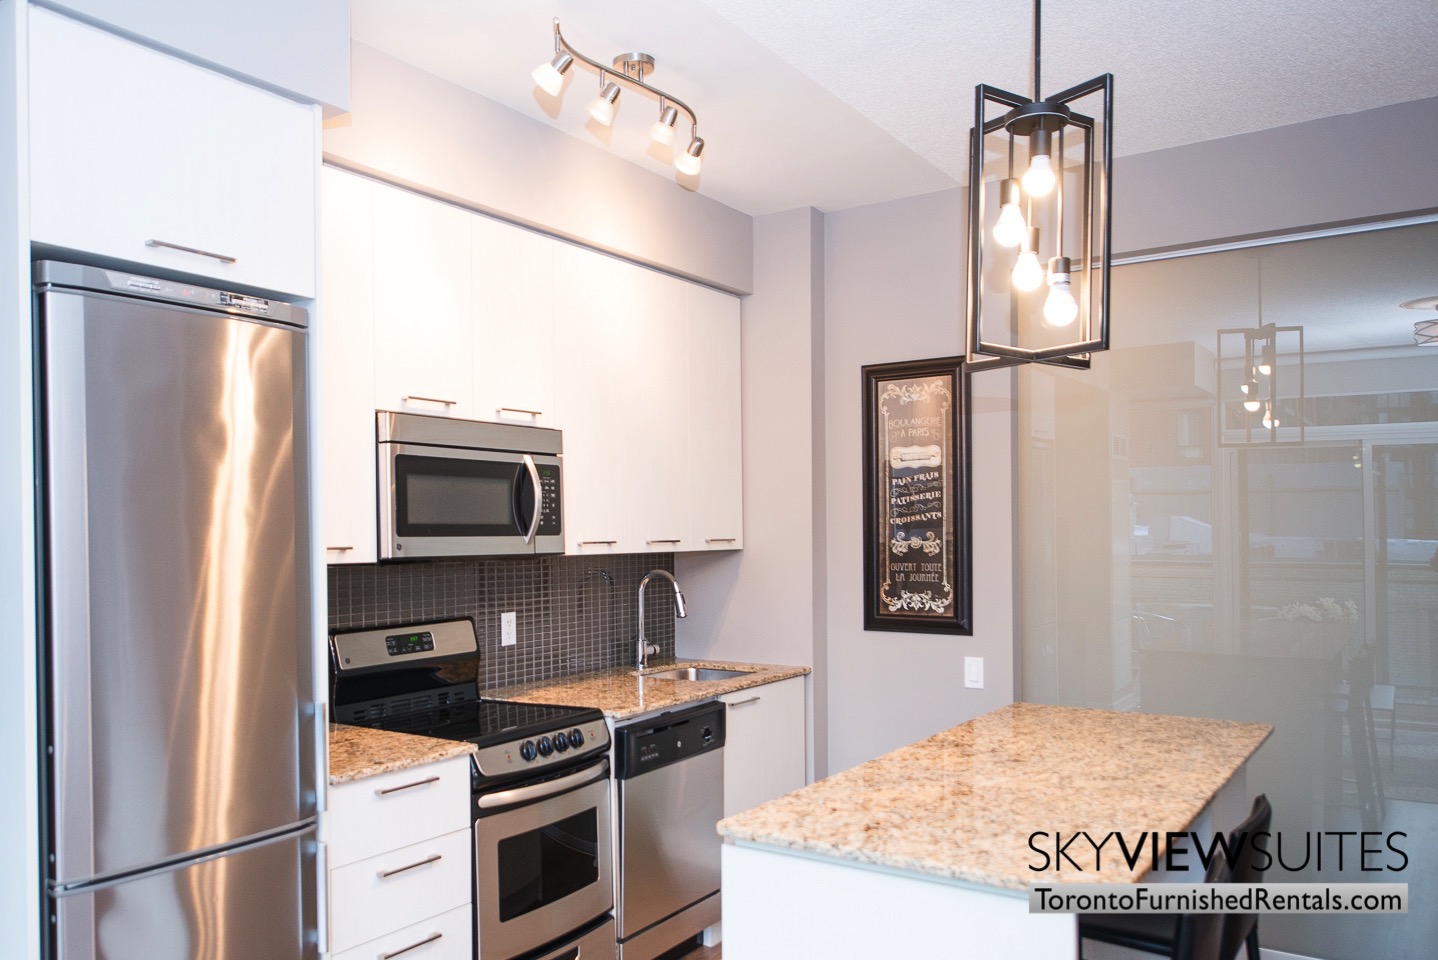 furnished-apartments-kitchen-King-west